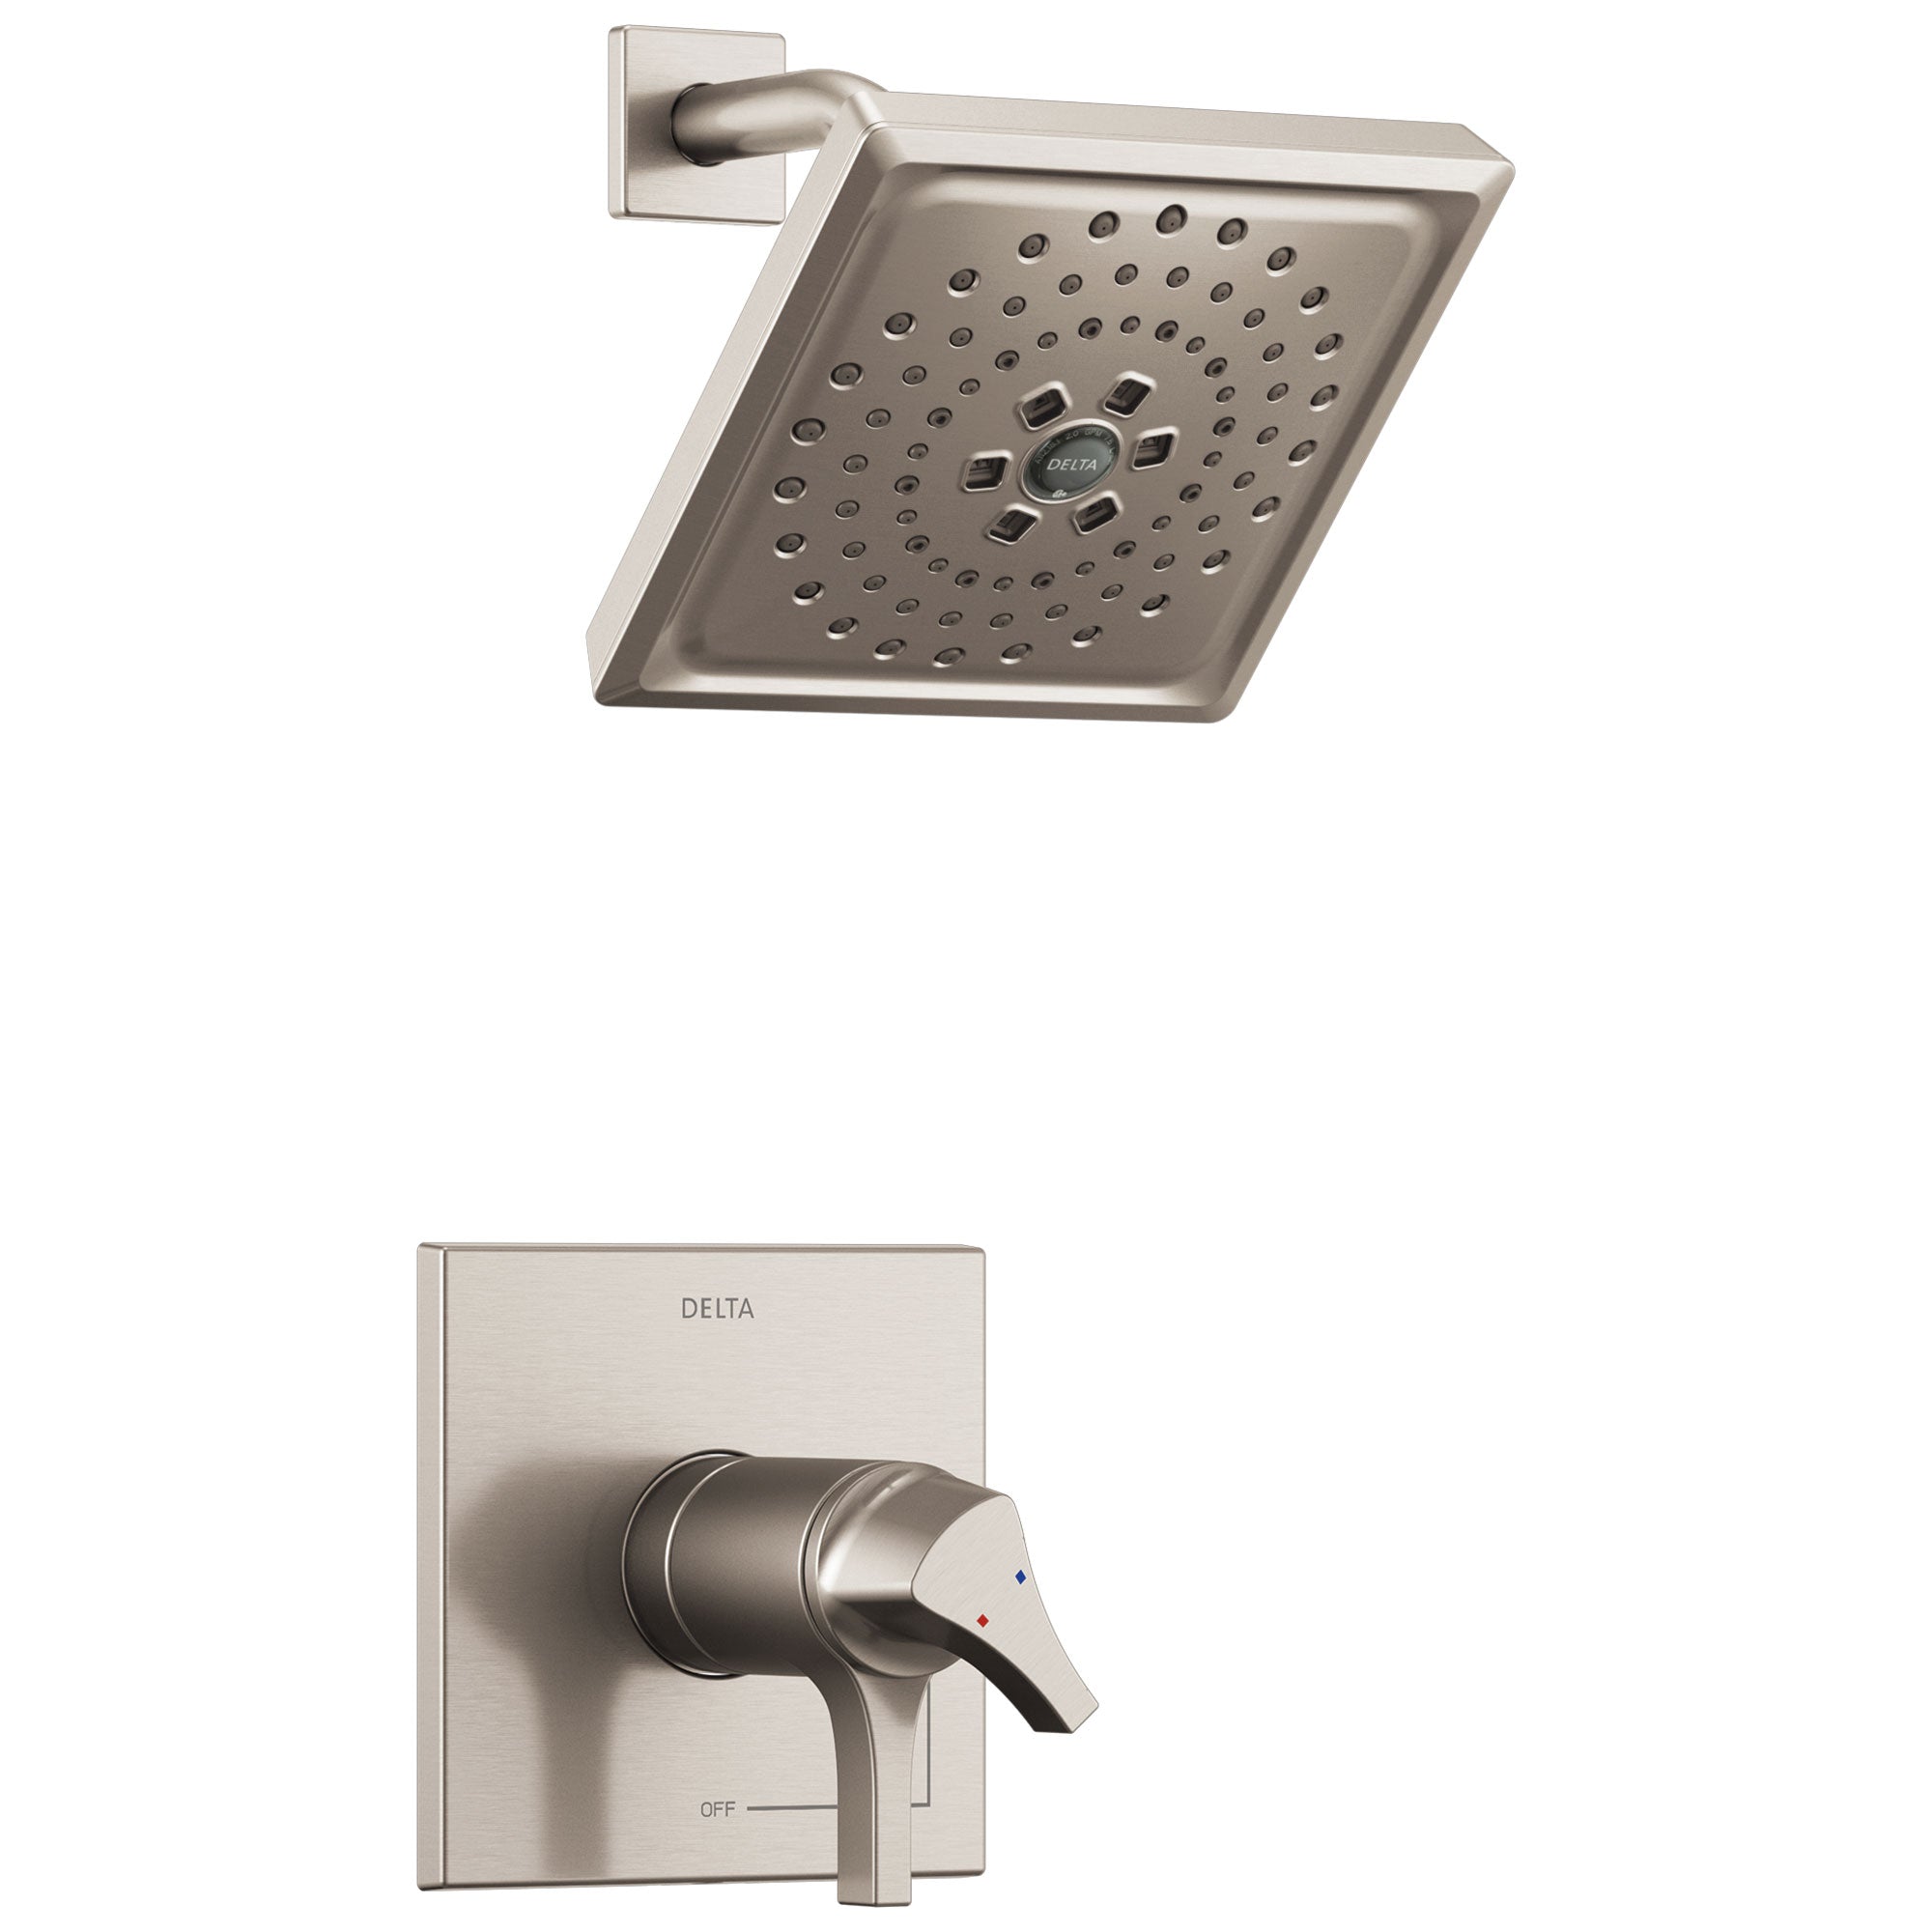 Delta Zura Collection Stainless Steel Finish TempAssure 17T Modern Dual Temperature and Volume Control Shower Faucet Includes Rough-in Valve with Stops D1931V